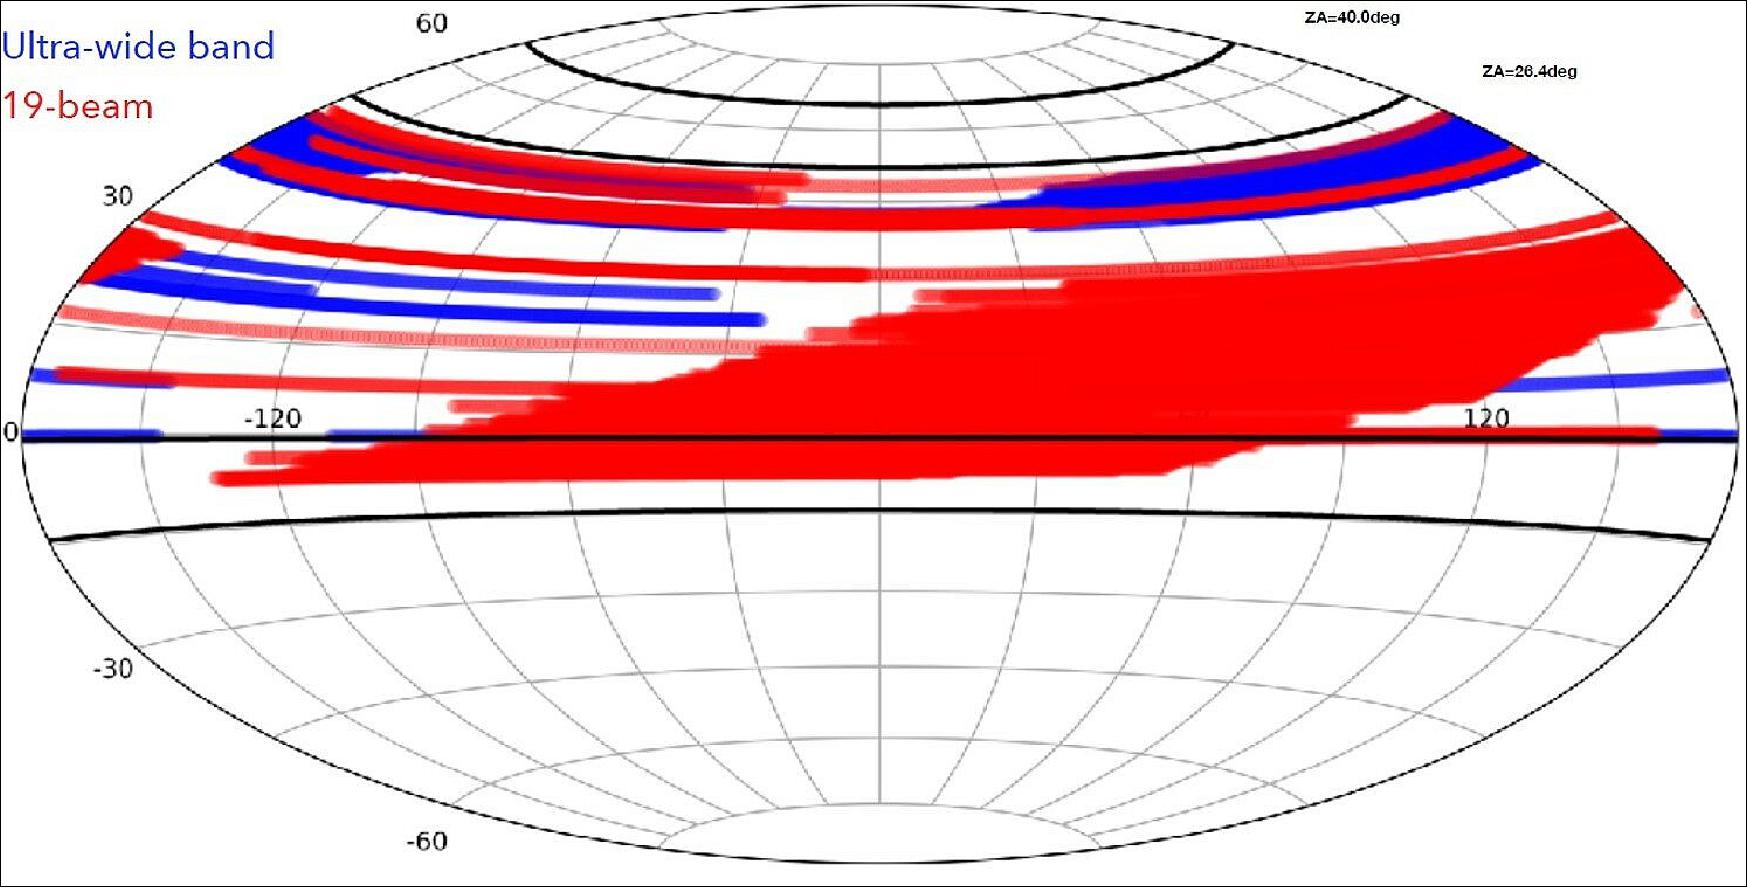 Figure 8: Sky coverage of the FAST HI survey. The red area is observed using the 19-beam receiver, while the blue area is observed using an ultra-wide band receiver. (image credit: FAST HI survey team)